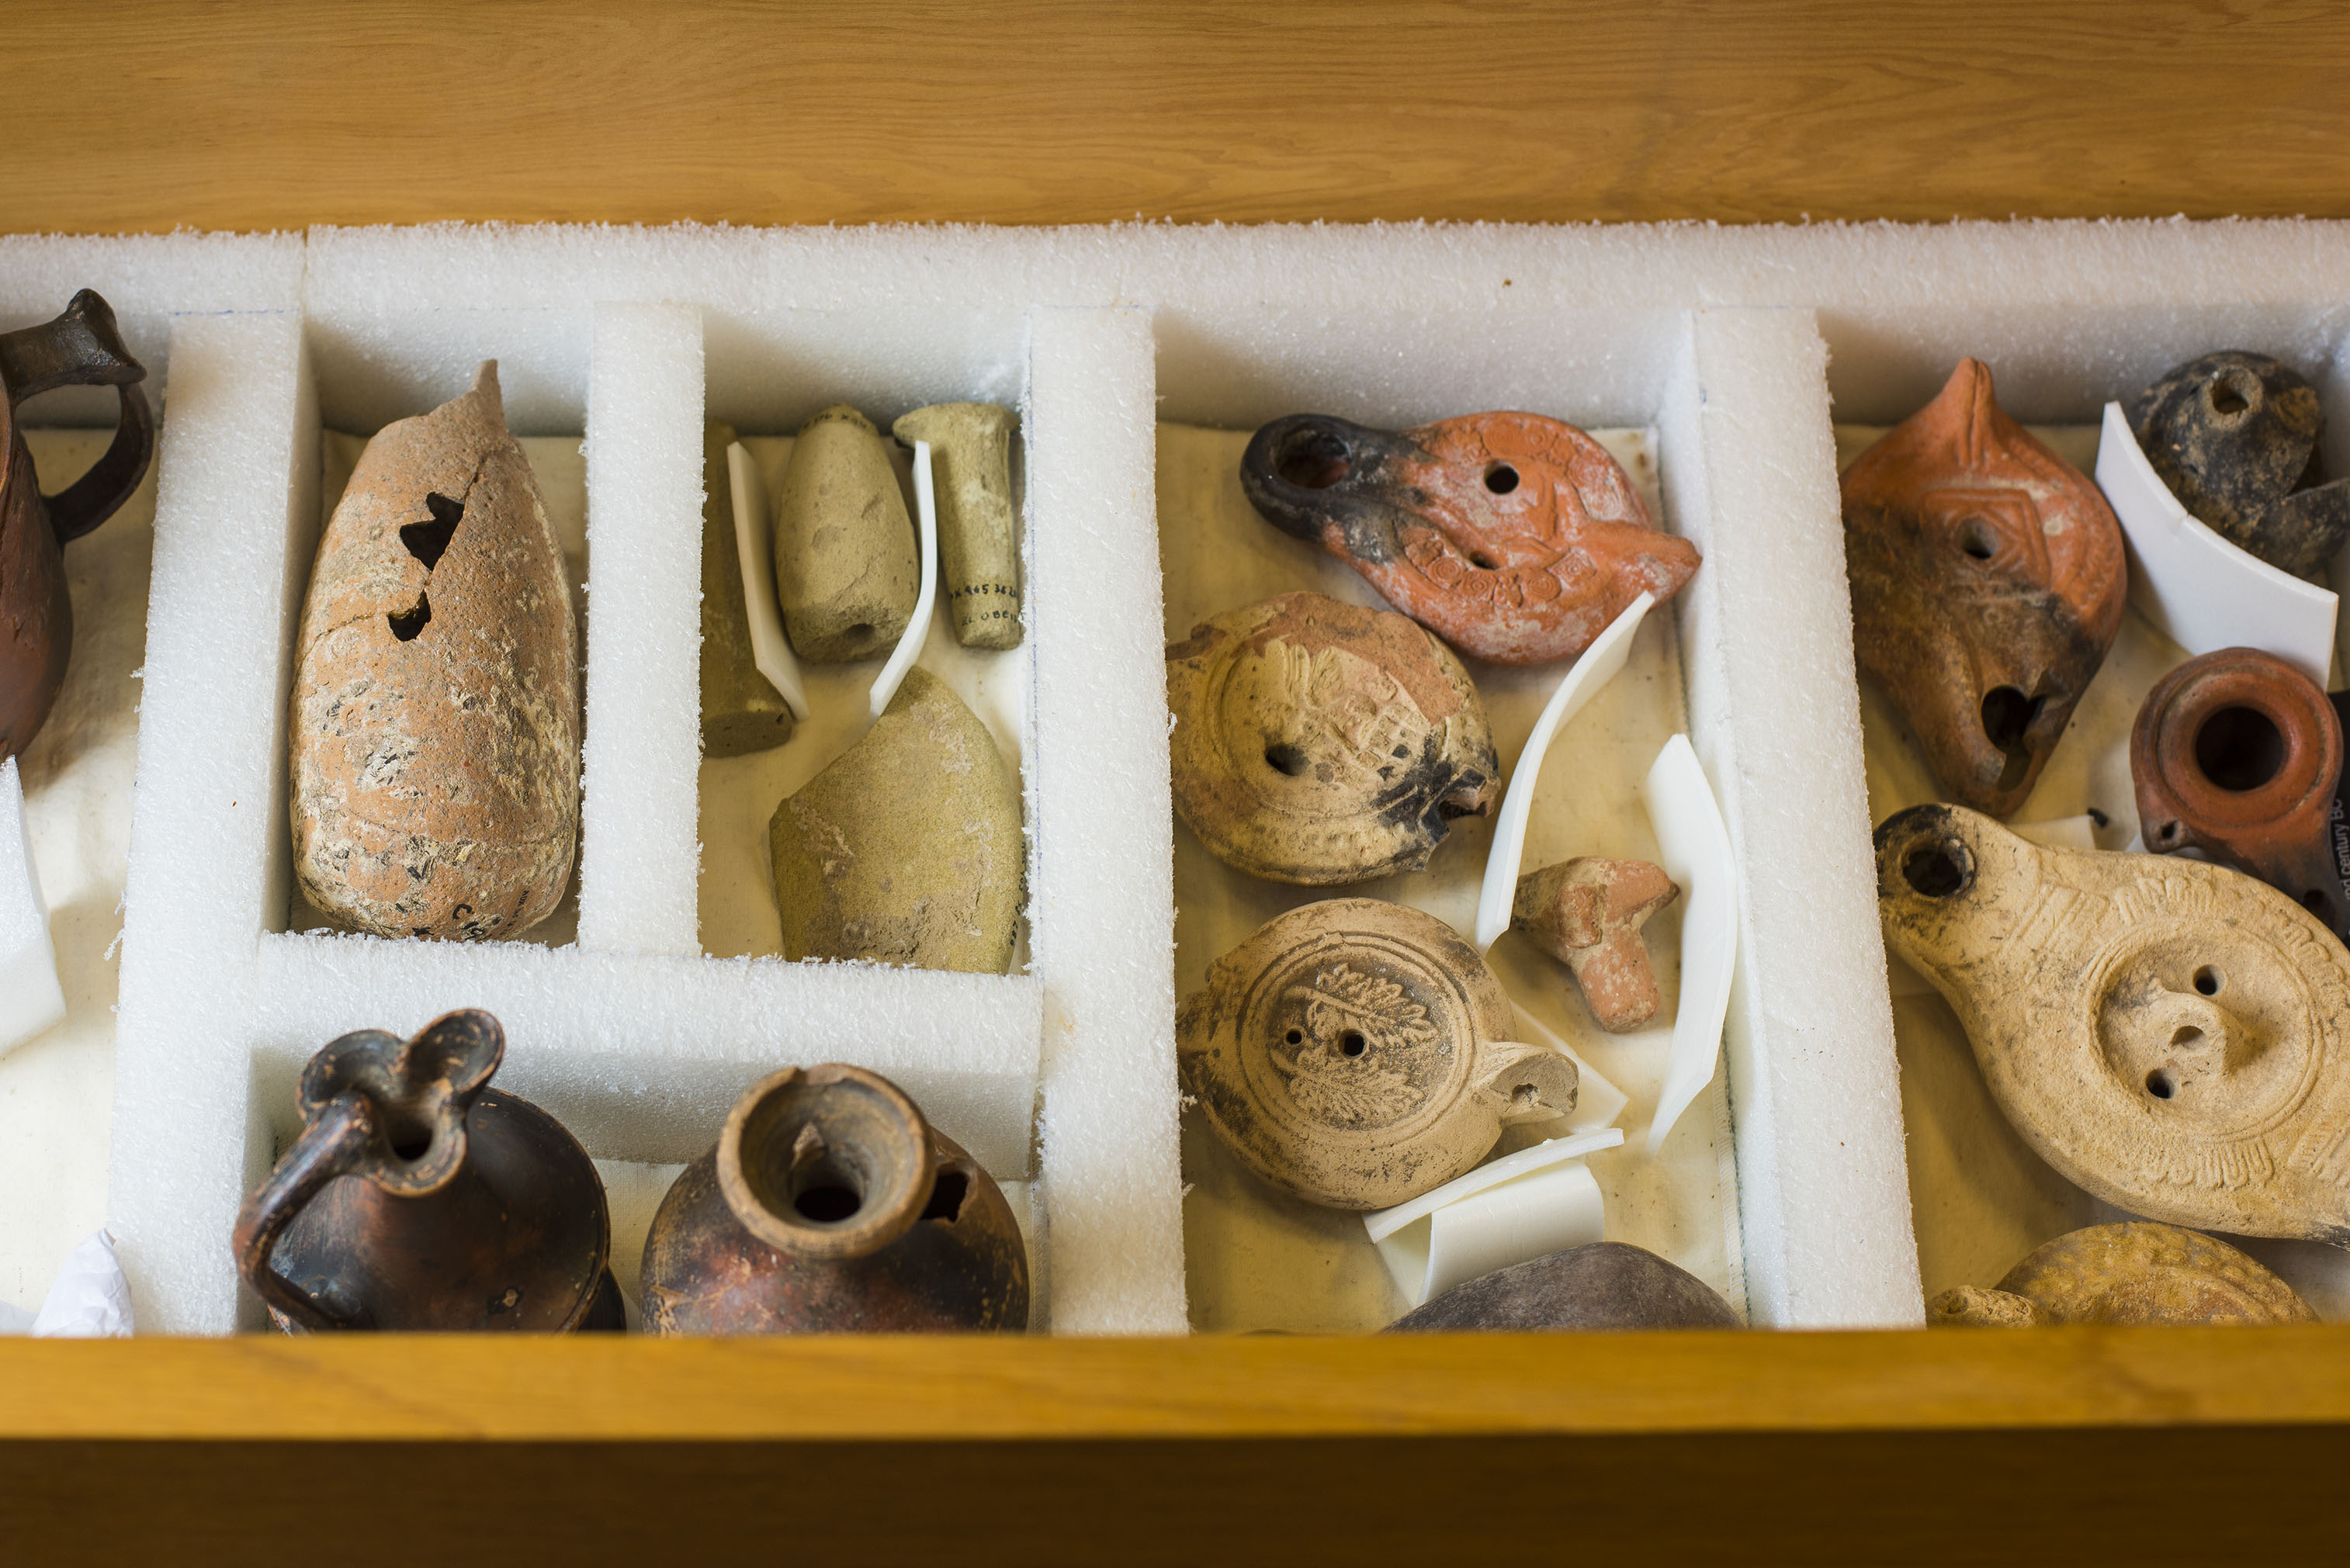 An assortment of small, fragmented clay artifacts, separated by walls of foam in a wooden box